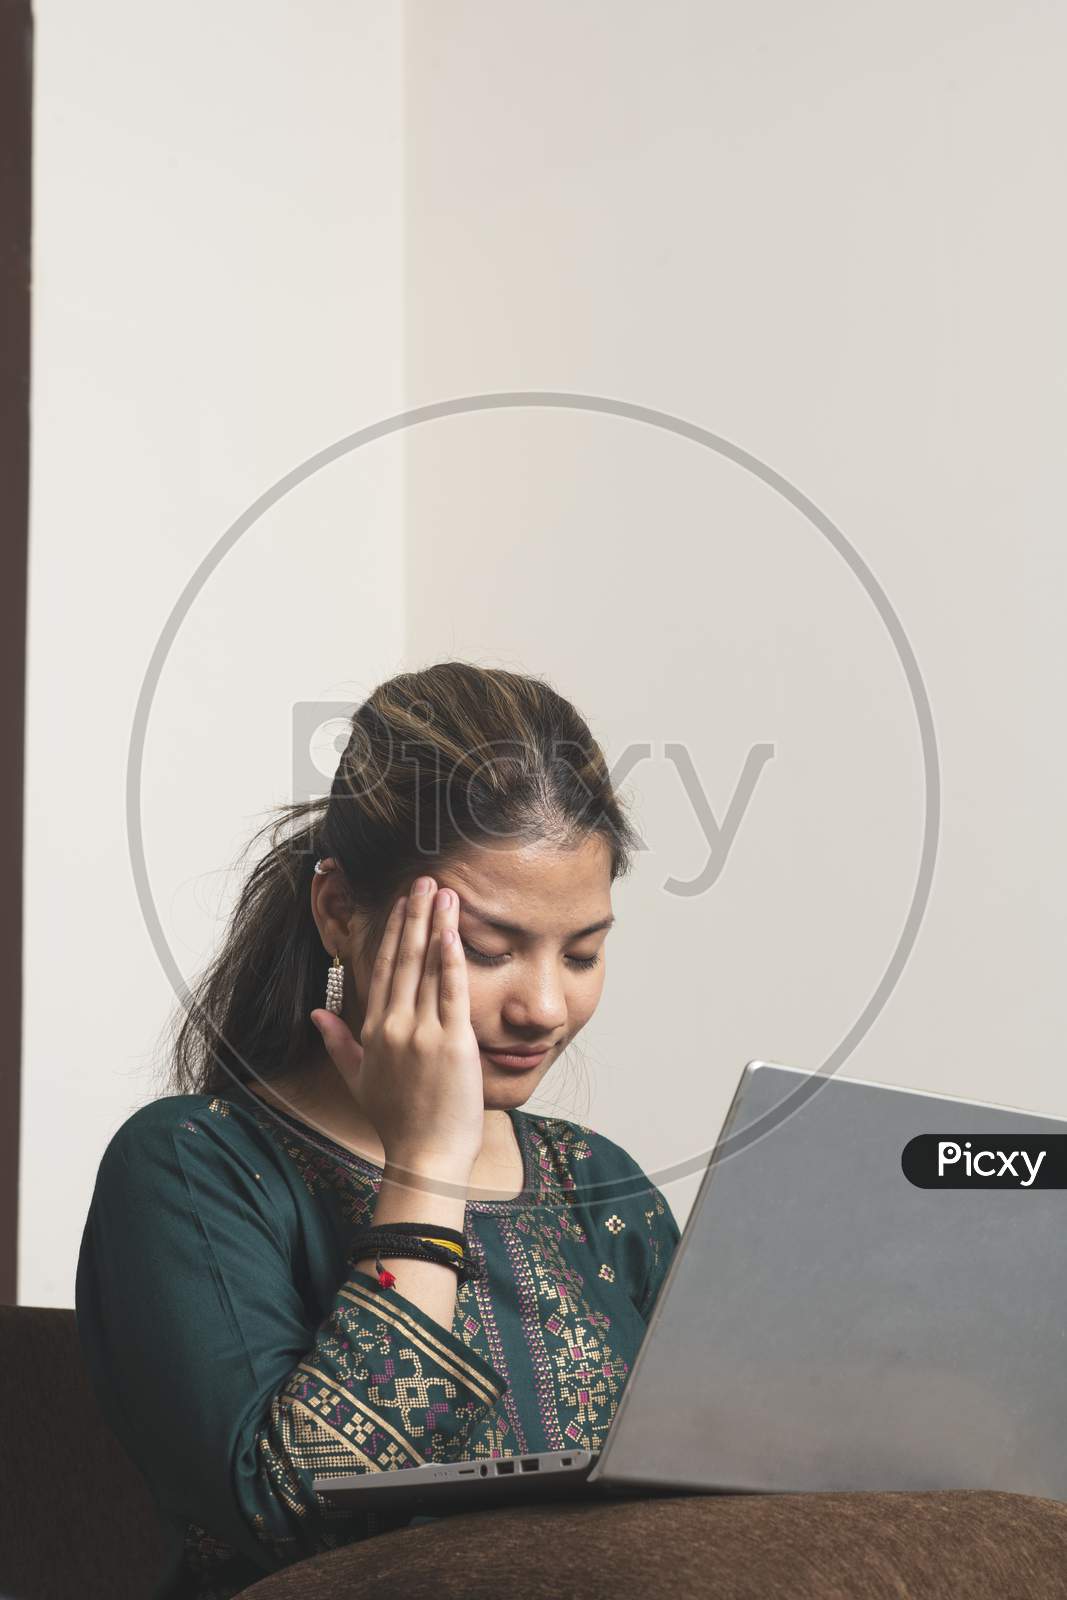 Young Indian Working Girl Feeling Headache While Working On Her Laptop.Eeling Desperate Alone At Home. Unhappy Stressed Millennial Indian Ethnicity Woman Hiding Face In Hands, Suffering From Life Problems Or Headache.